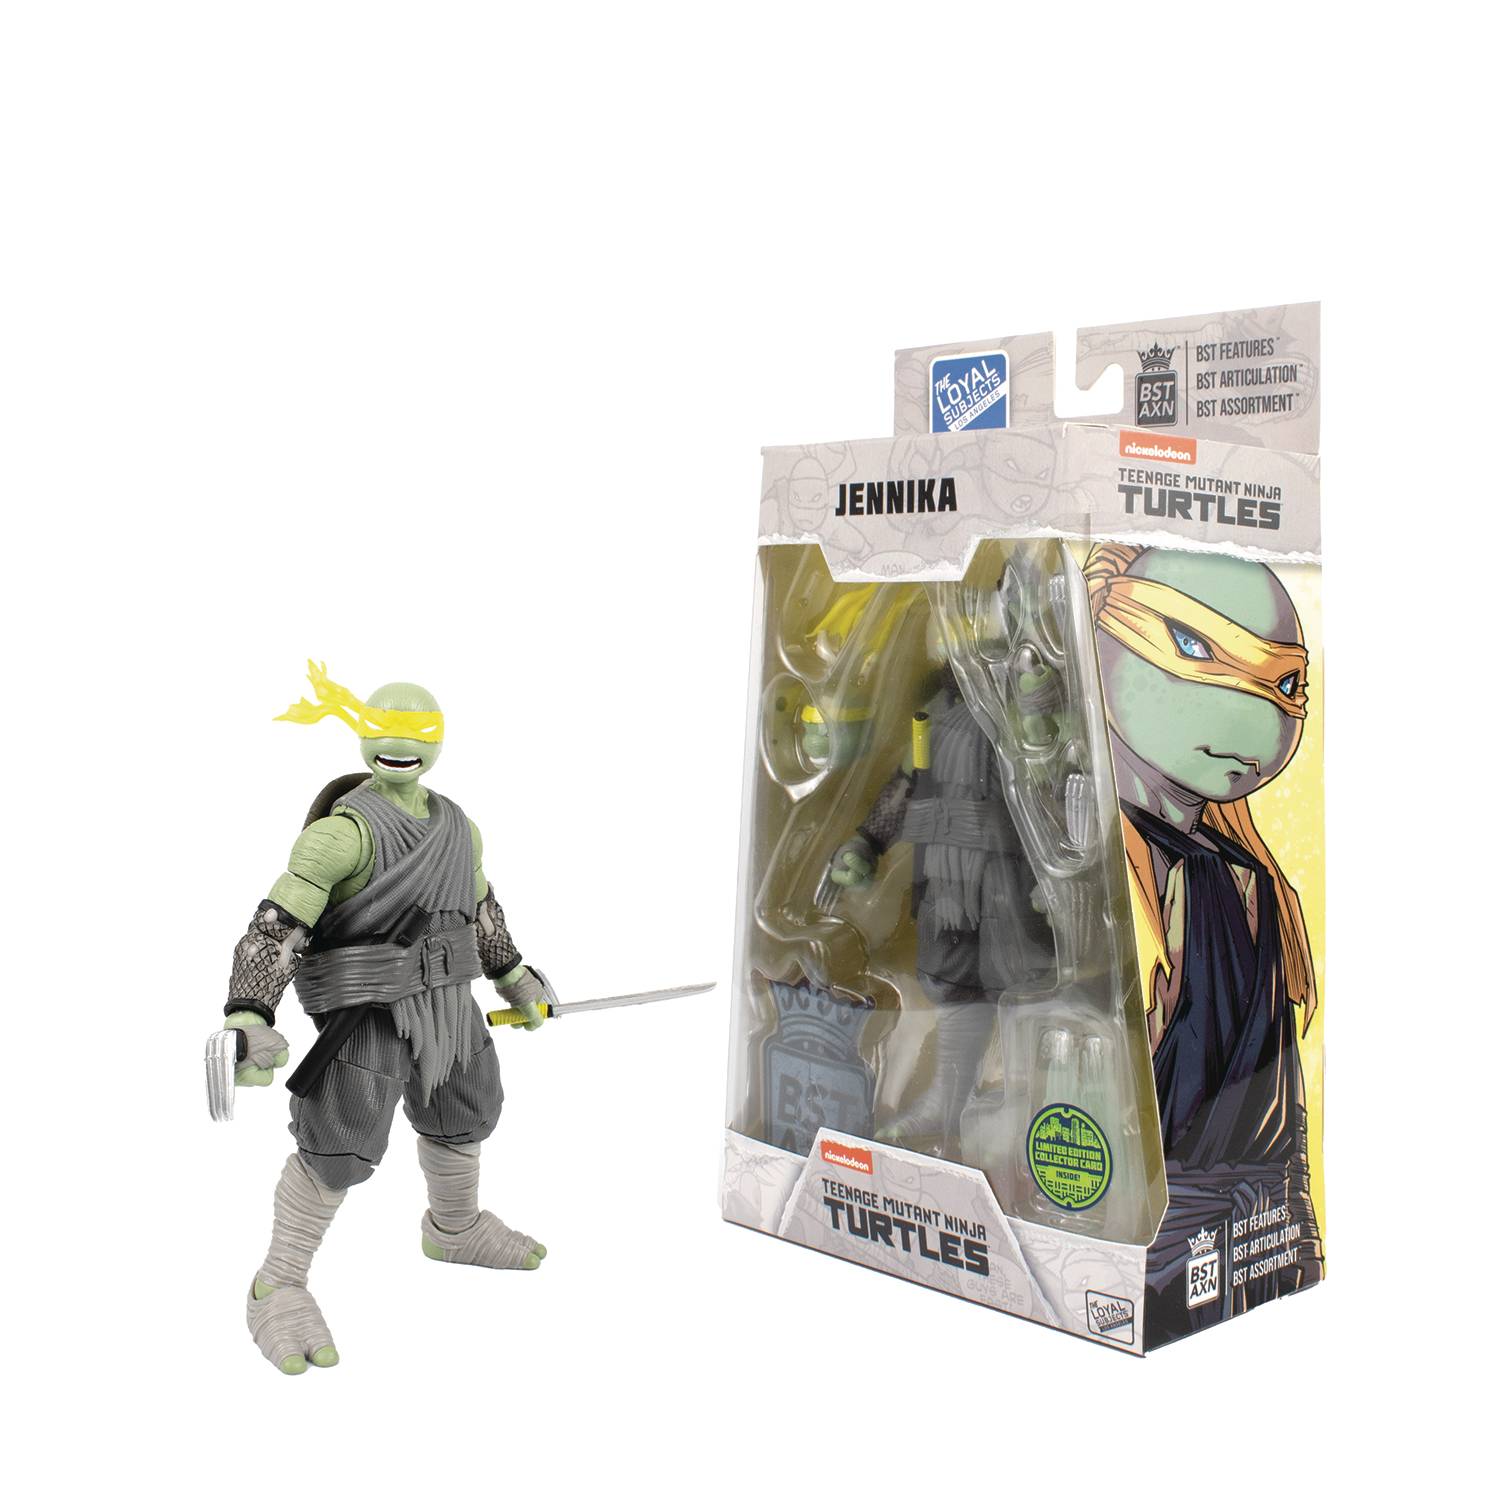 TMNT BST AXN IDW INSPIRED JENNIKA 5IN ACTION FIG